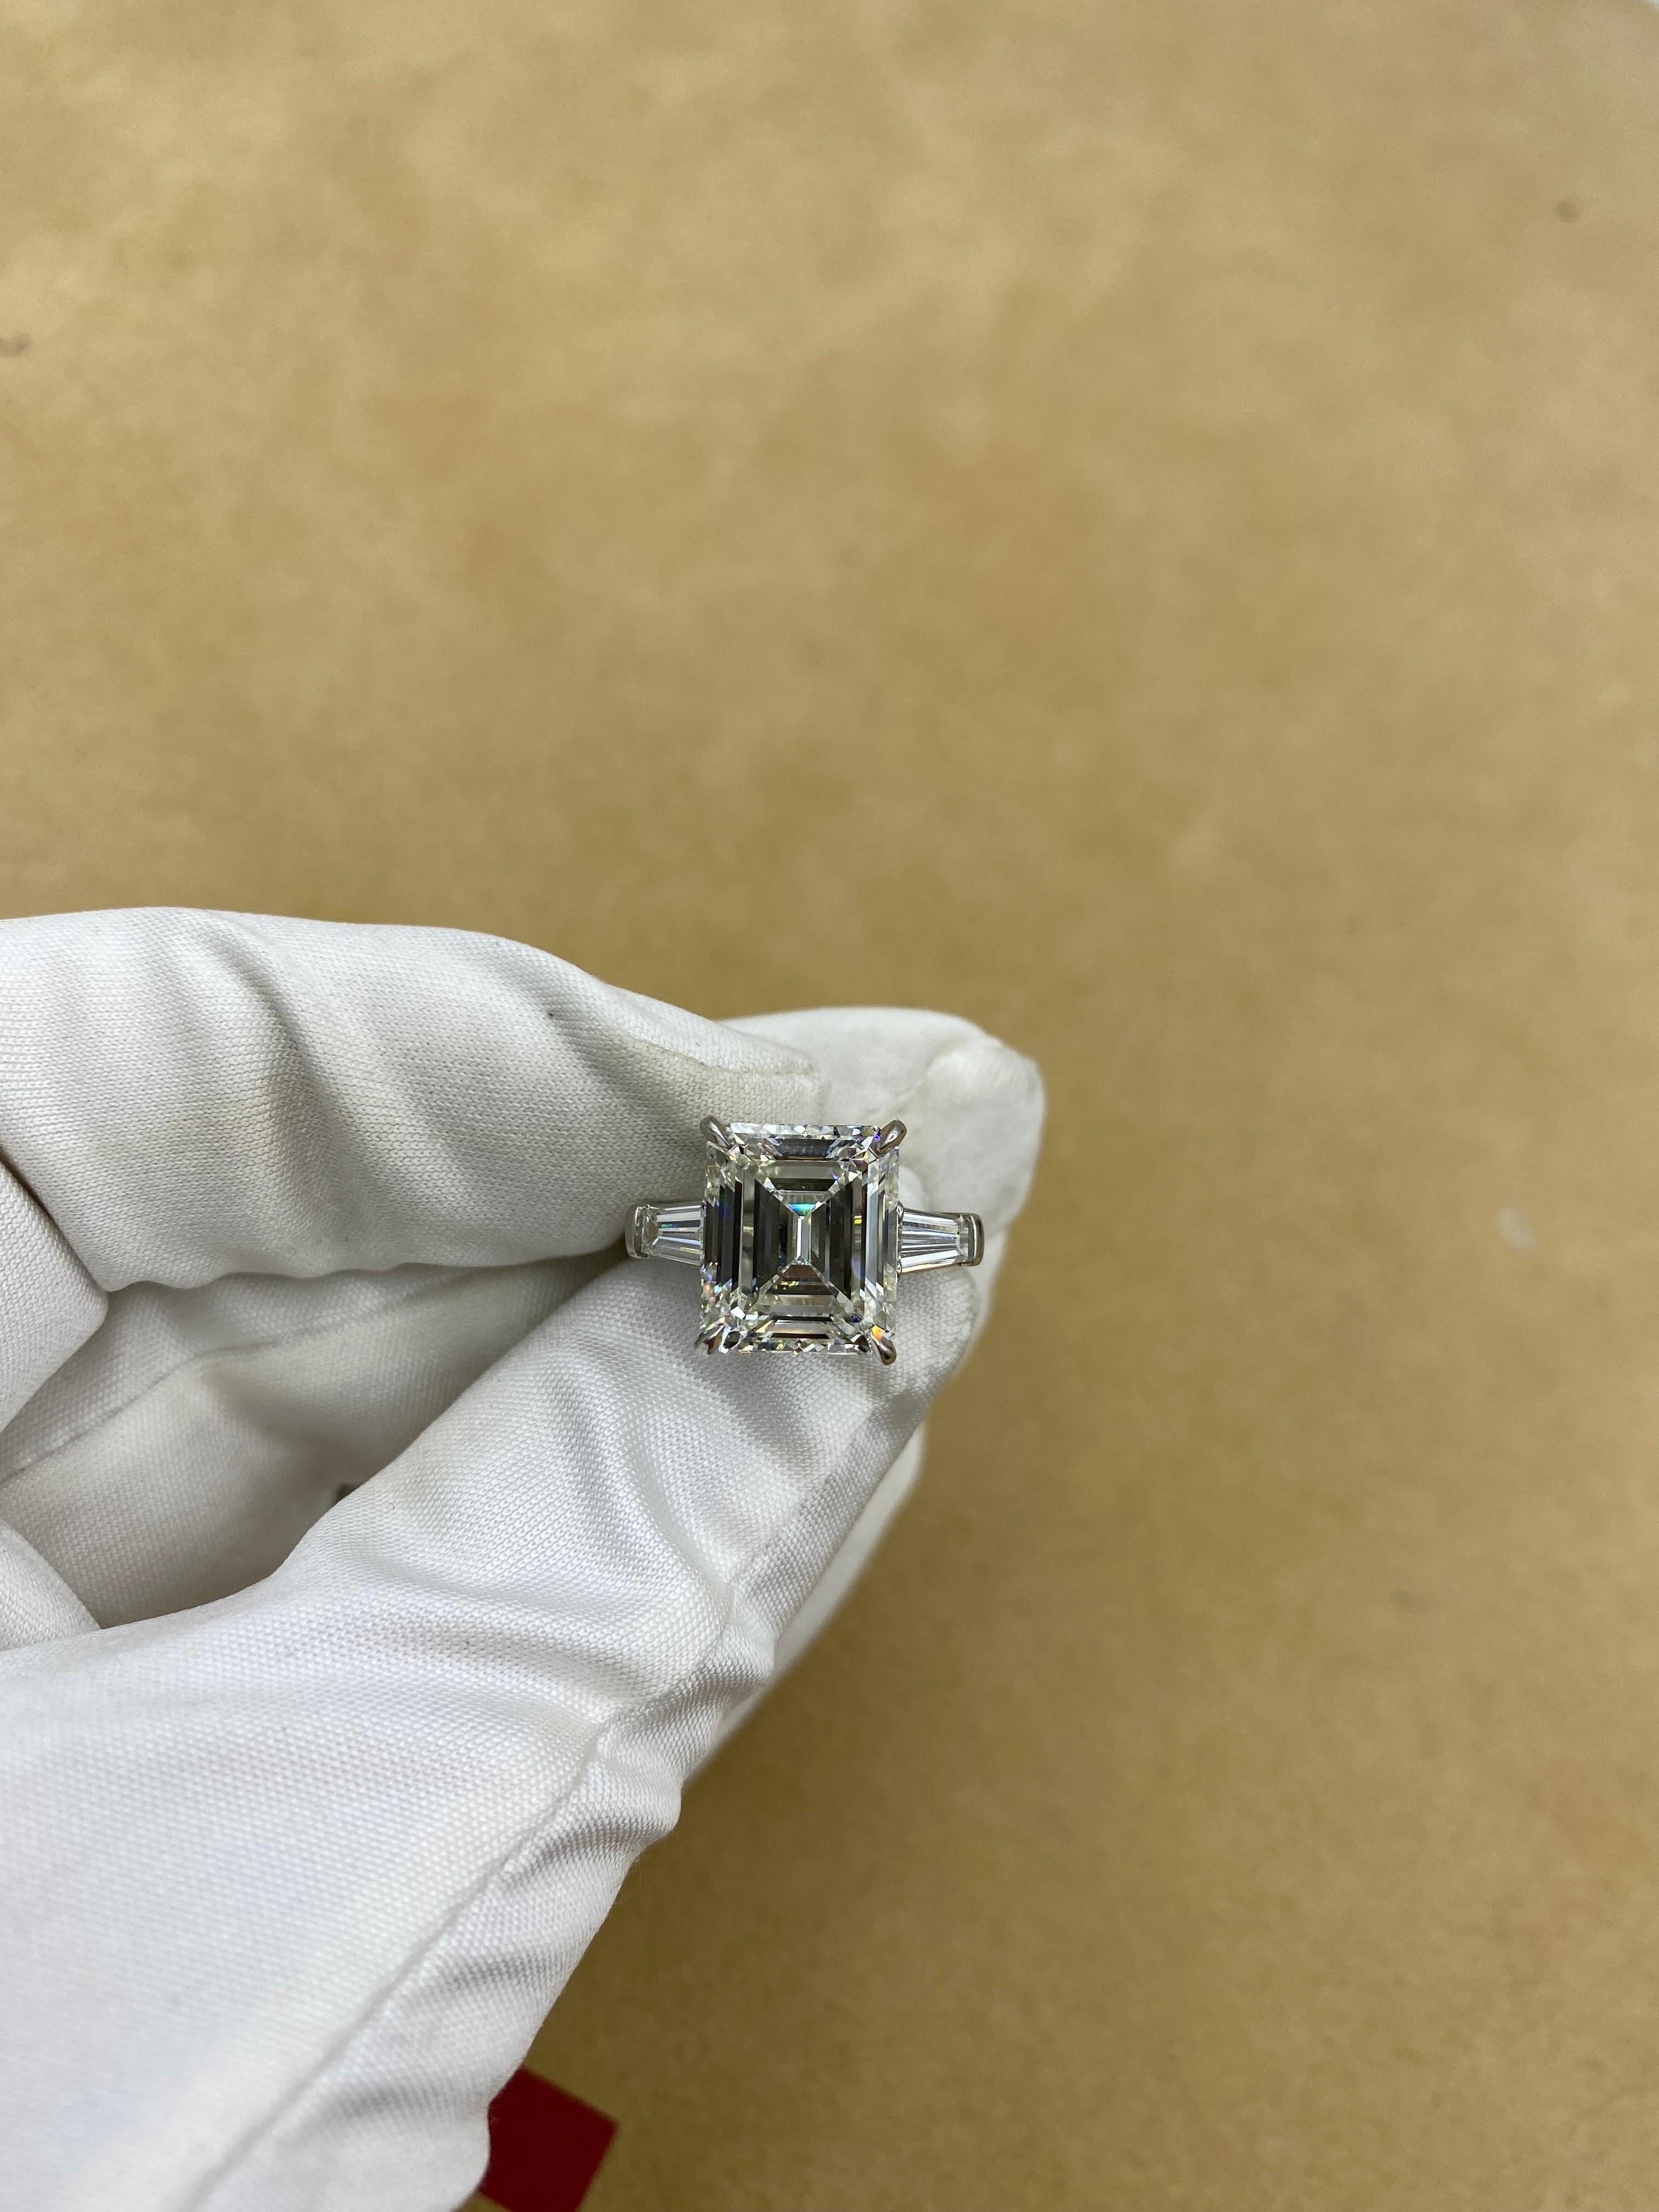 From The Vault at Emilio Jewelry Located on New York's iconic Fifth Avenue,
Inquire for a detailed video! 
Showcasing a very special and rare Gia certified natural emerald cut diamond center weighing over 7 carats. Total weight shown in title. 
